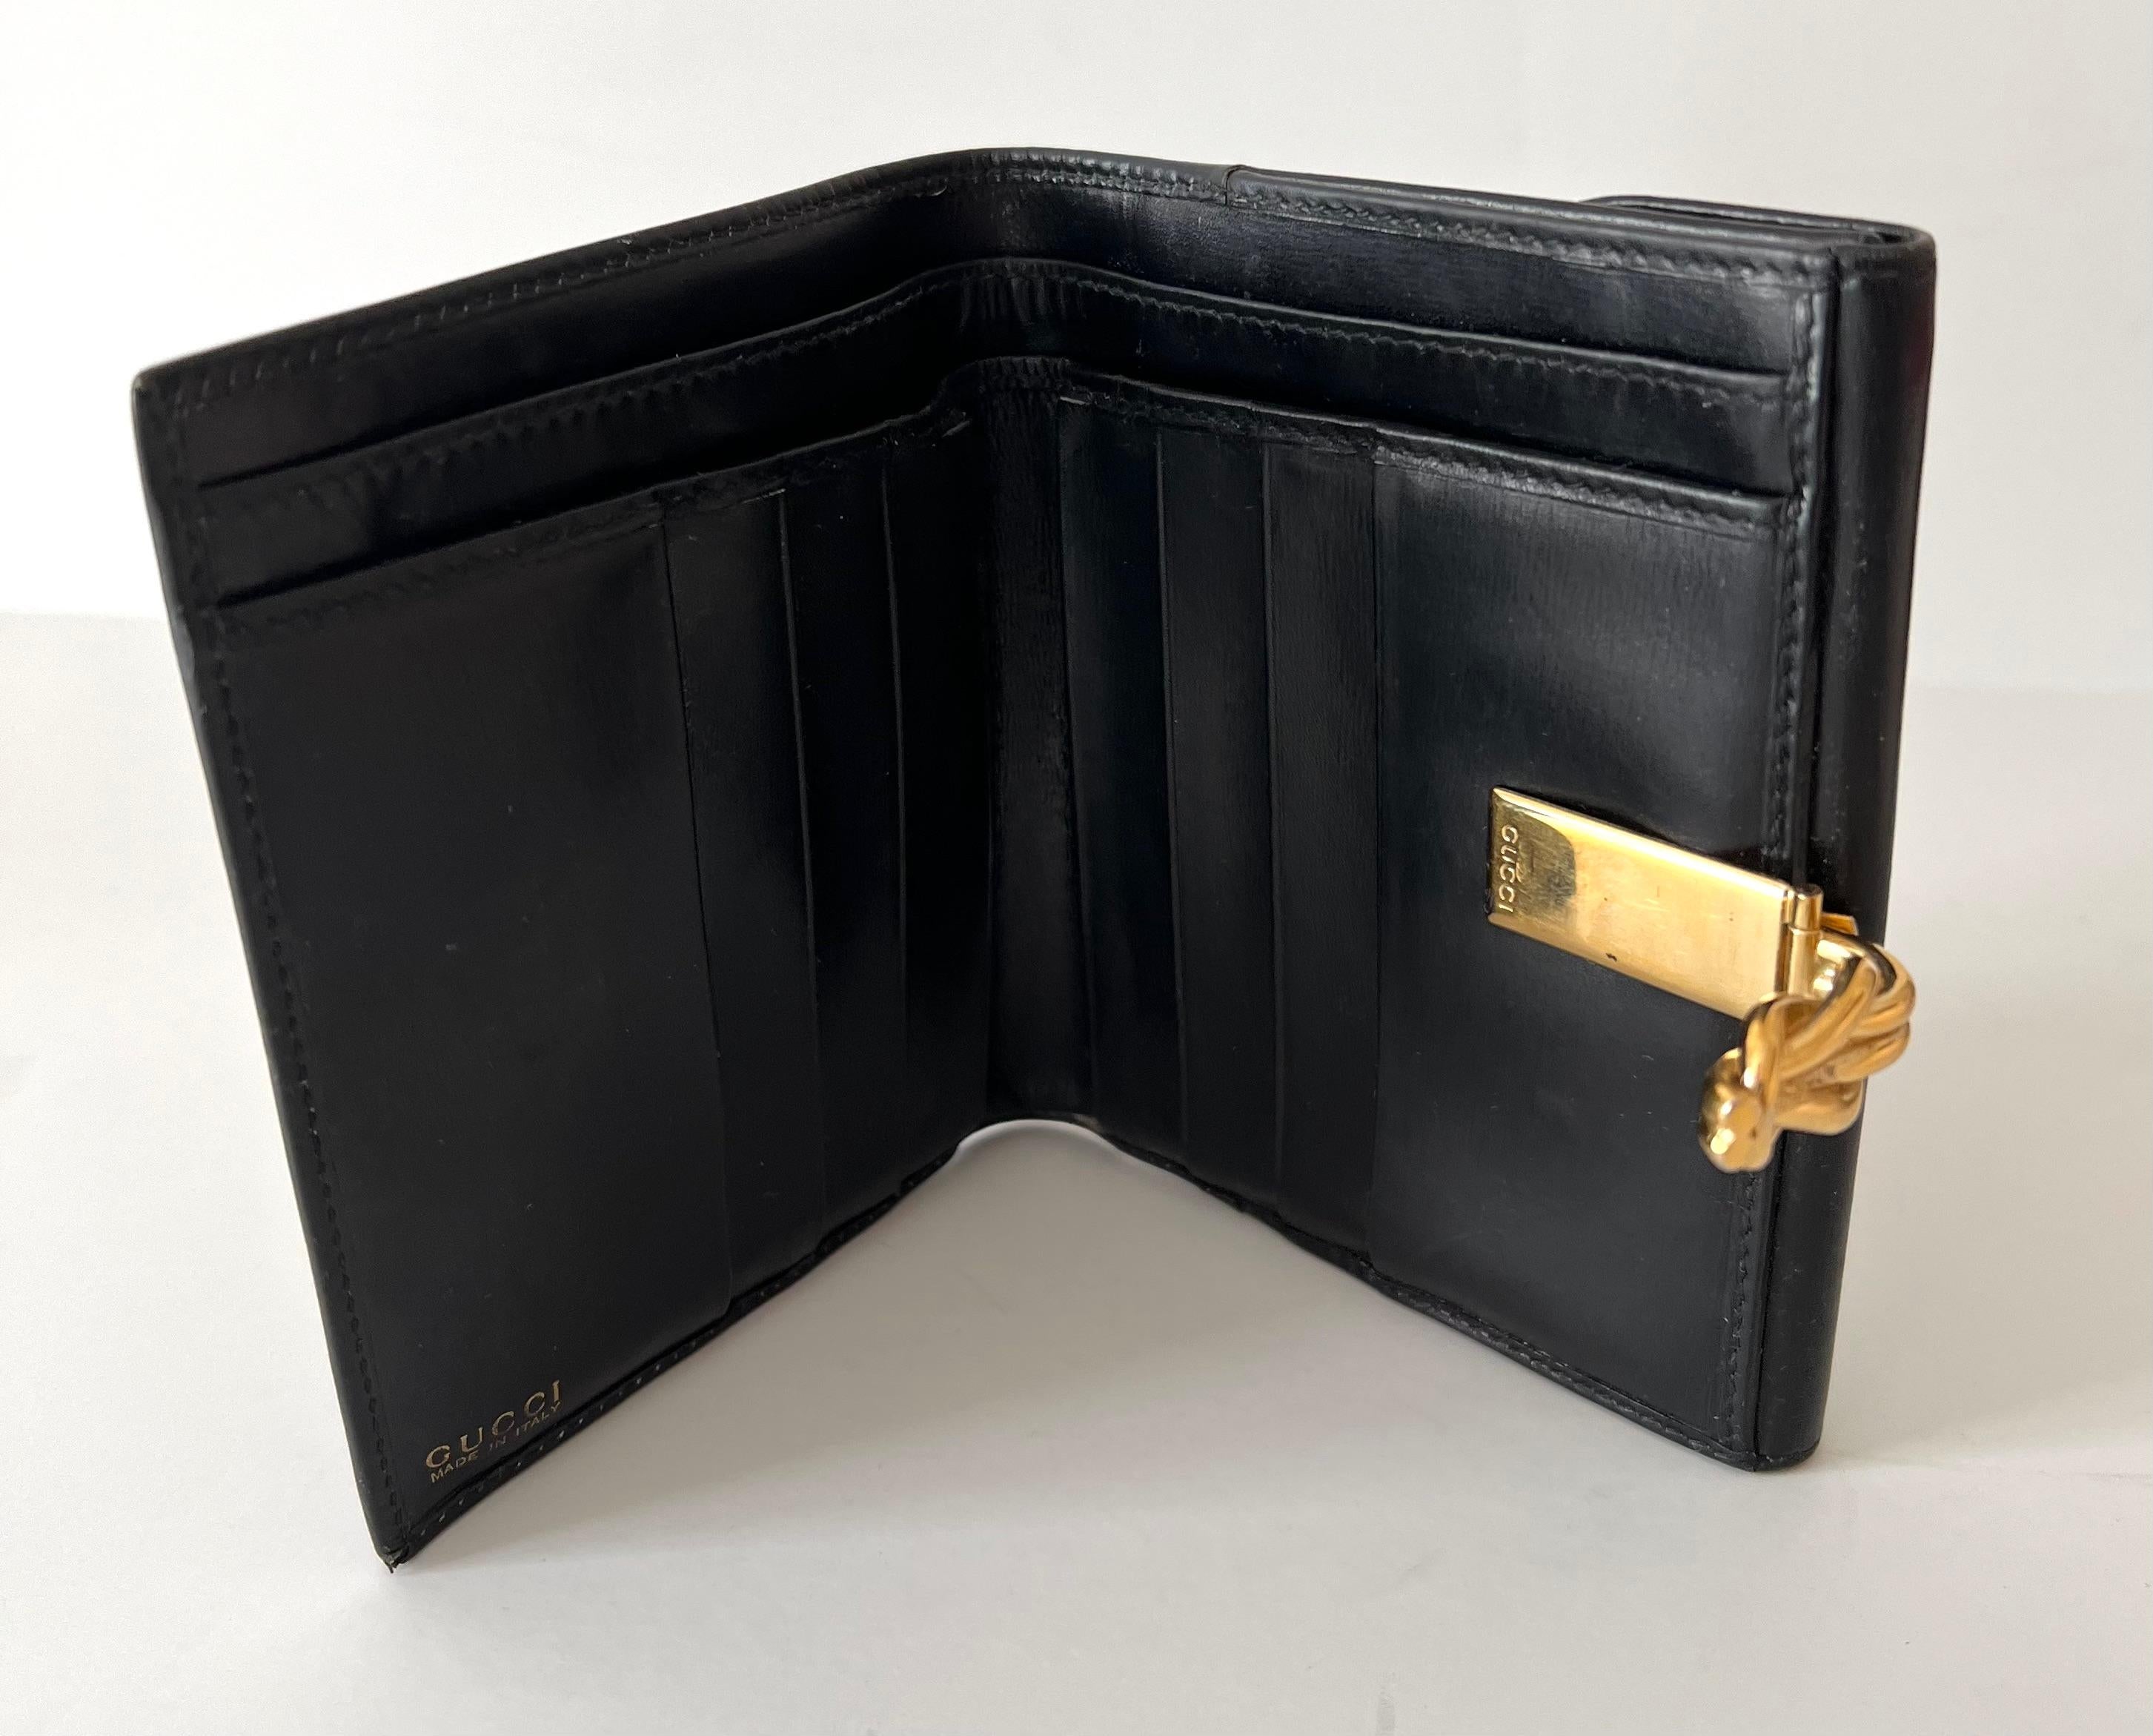 Modern Gucci Italian Leather Wallet with Gold Knott Closure and Coin Holder For Sale